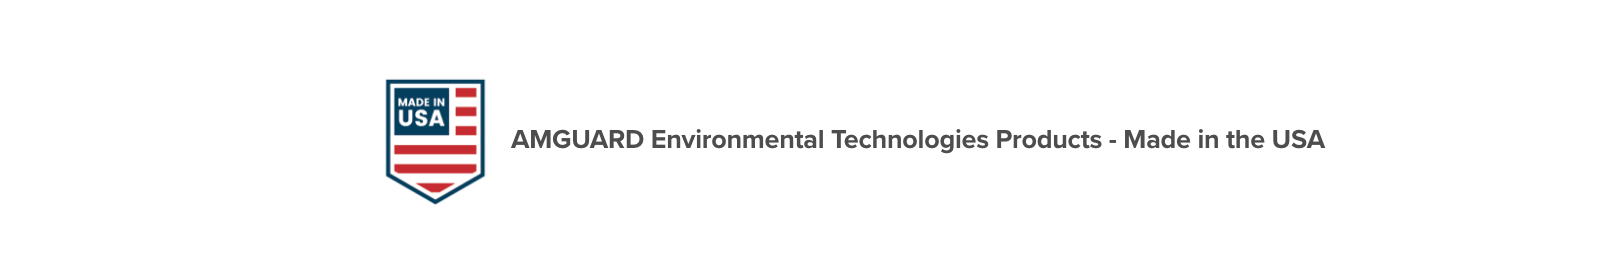 AMGUARD Environmental Technologies Products are Made in the USA